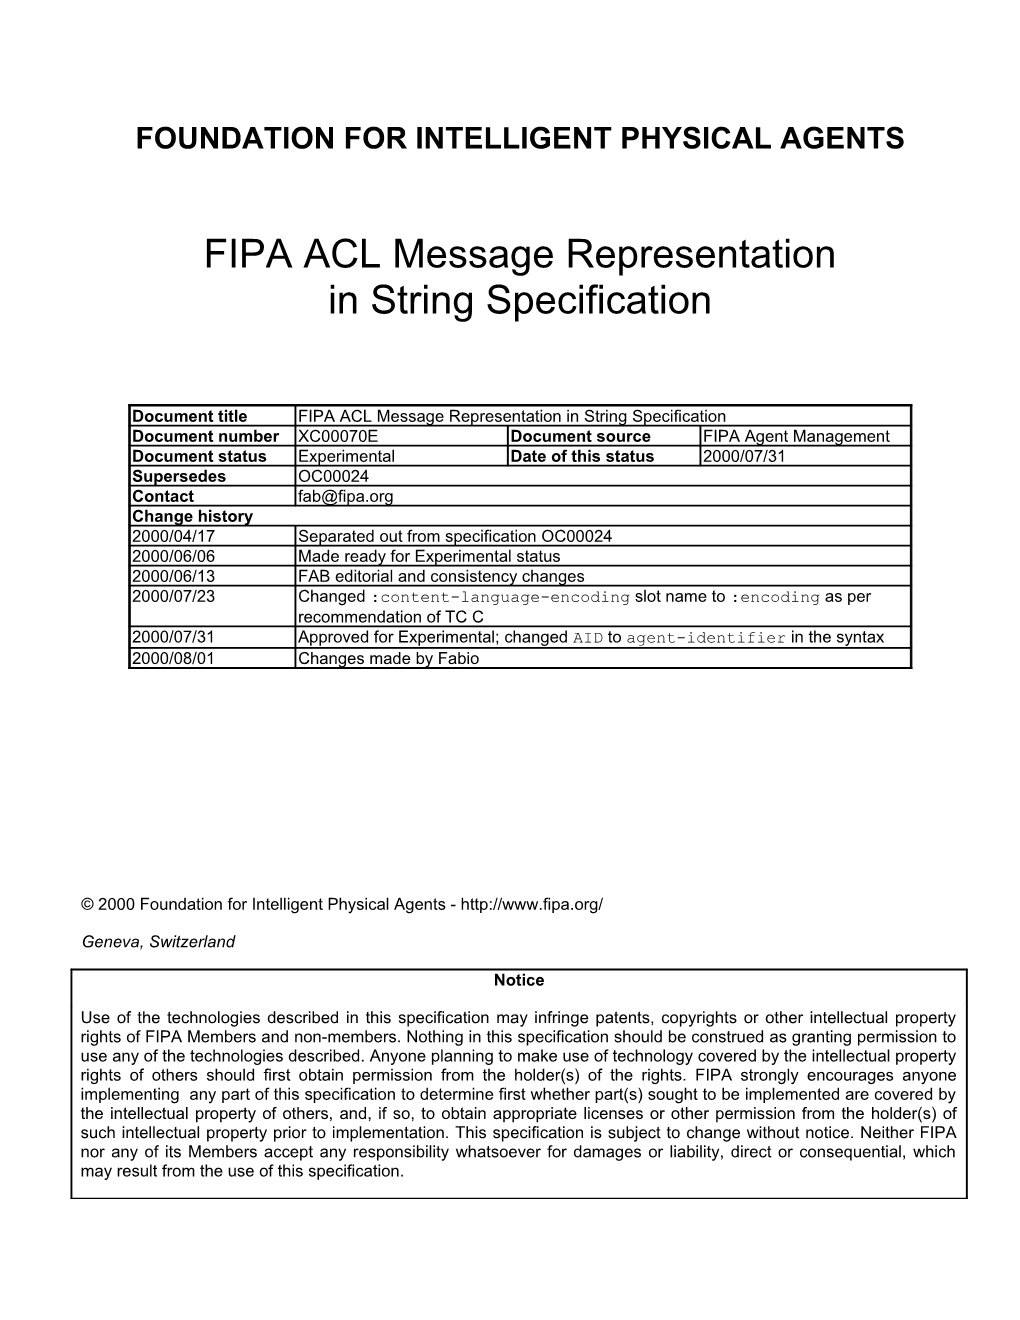 FIPA ACL Message Representation in String Specification